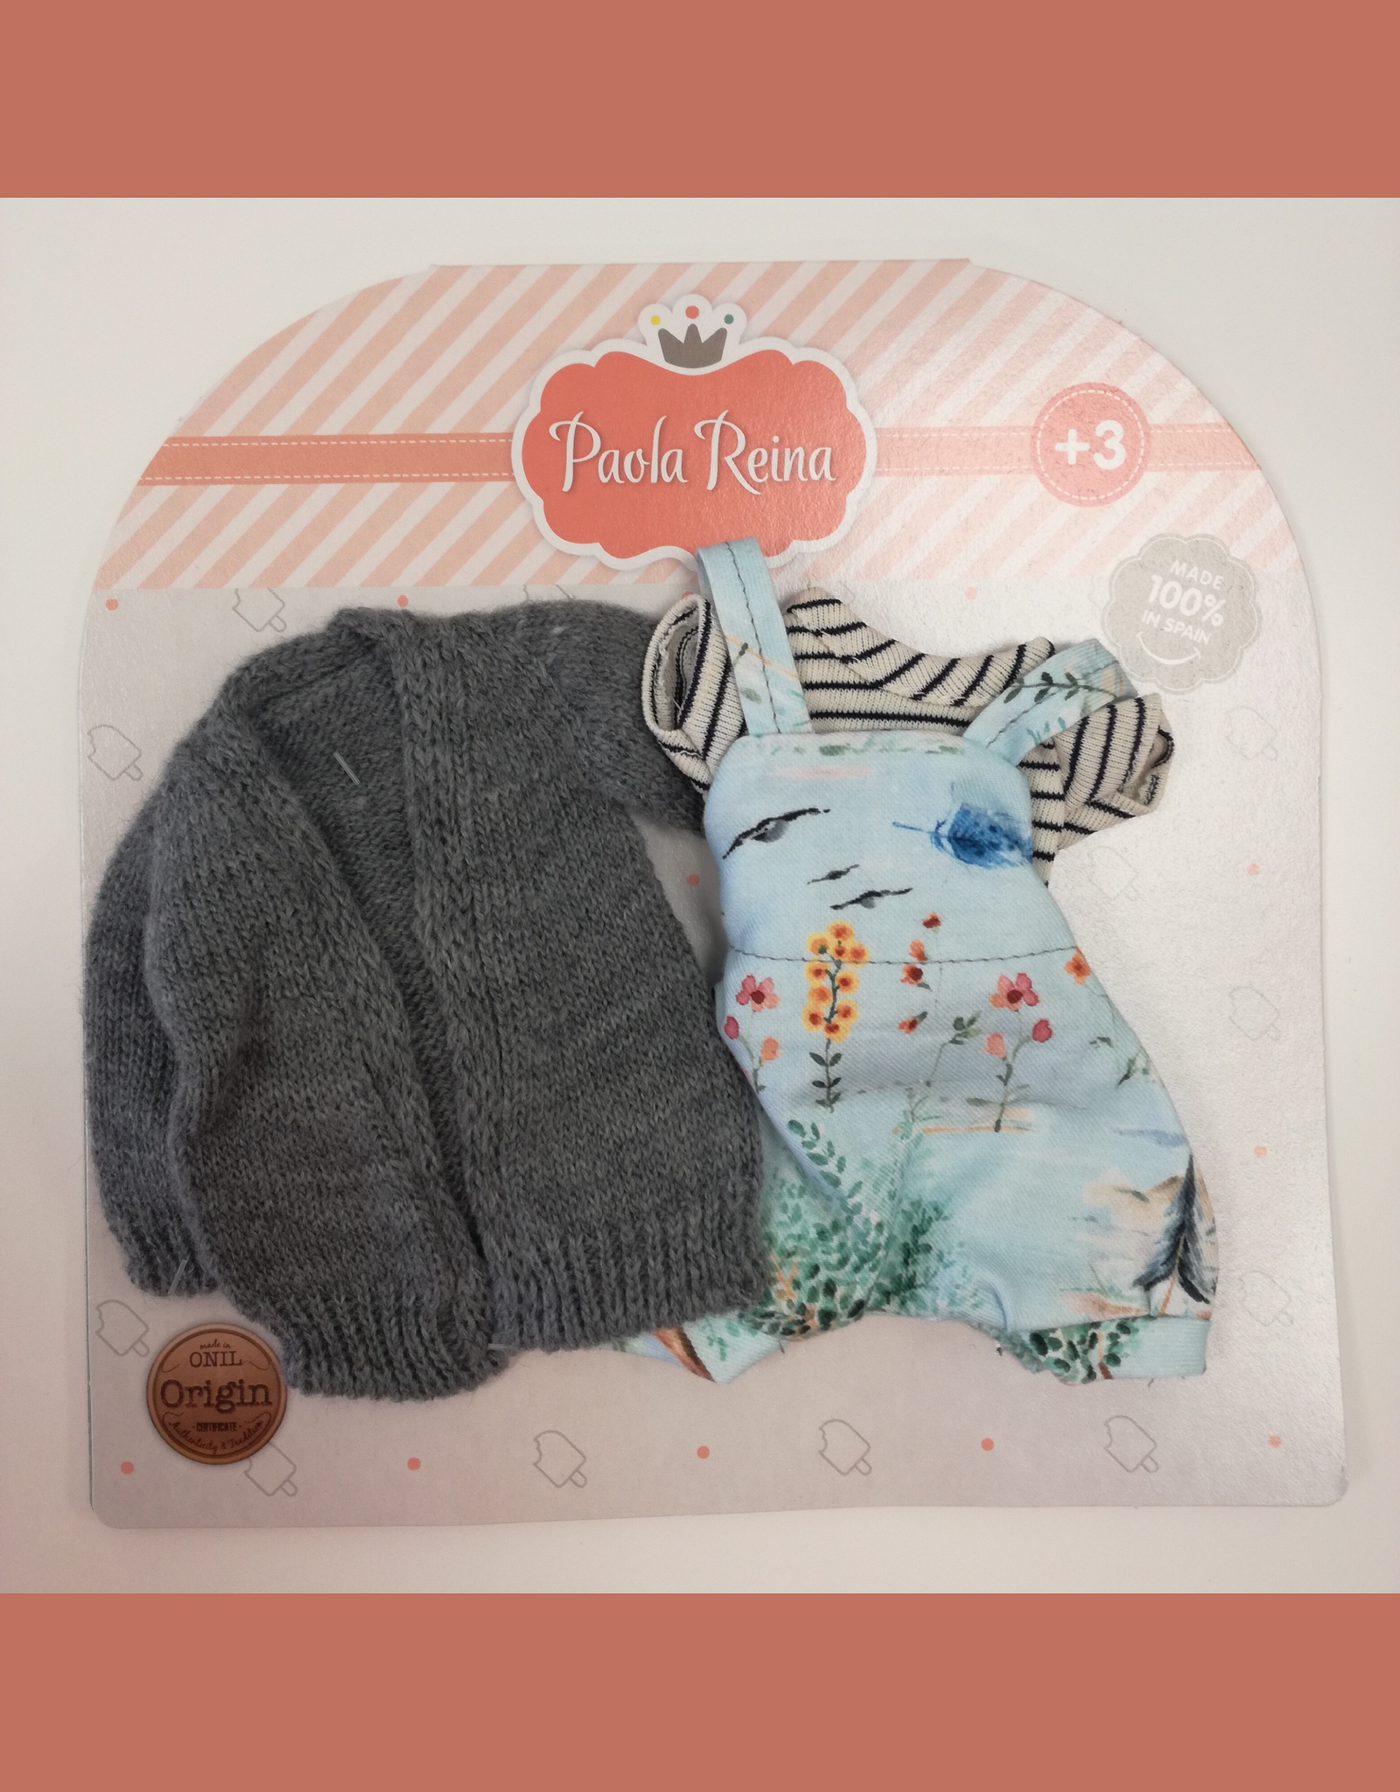 Las Amigas Doll Clothing - Blue jumper and gray jacket - Paola Reina